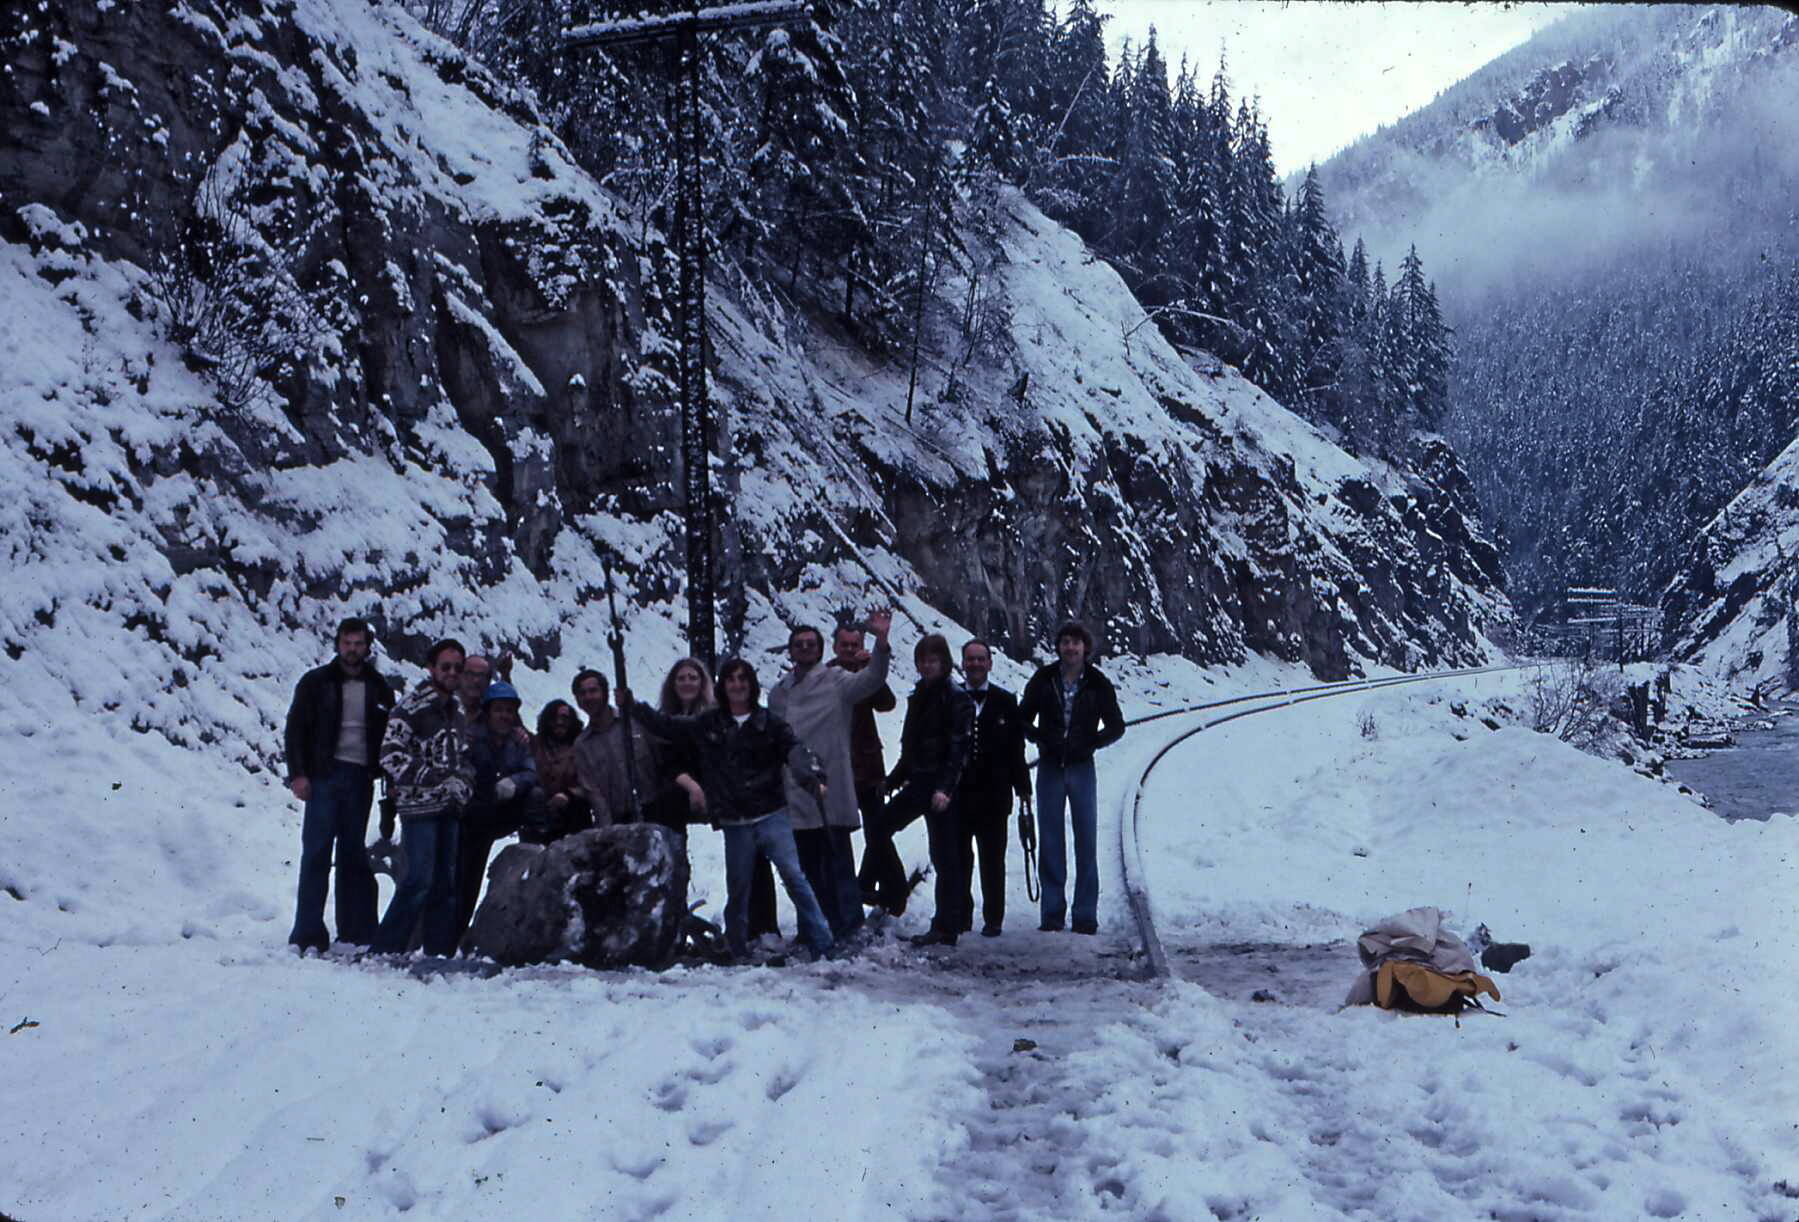 This group of CP Rail passengers helped remove rock from the tracks on Oct. 29, 1978. This photo, along with many other recently digitized photos, can be found in former CP conductor John Cowan’s new book. He hopes the book will help him reconnect with those helpful passengers that day. (John Cowan photo)